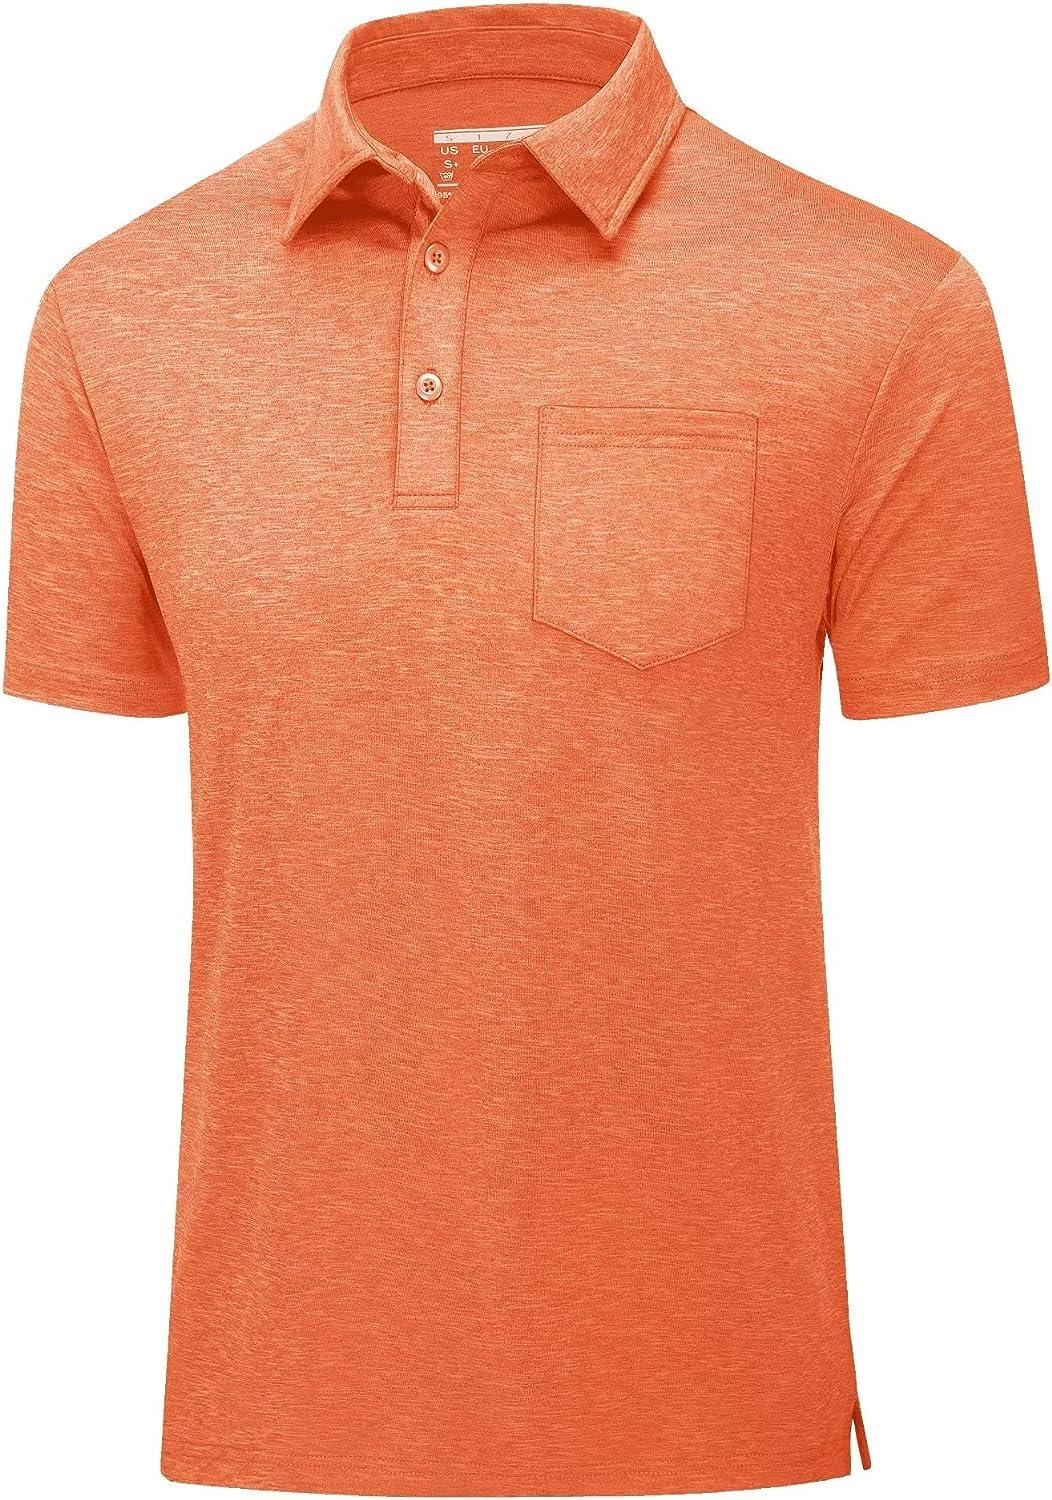 MAGCOMSEN Men's Polo Shirt with Pocket Short Sleeve Collared